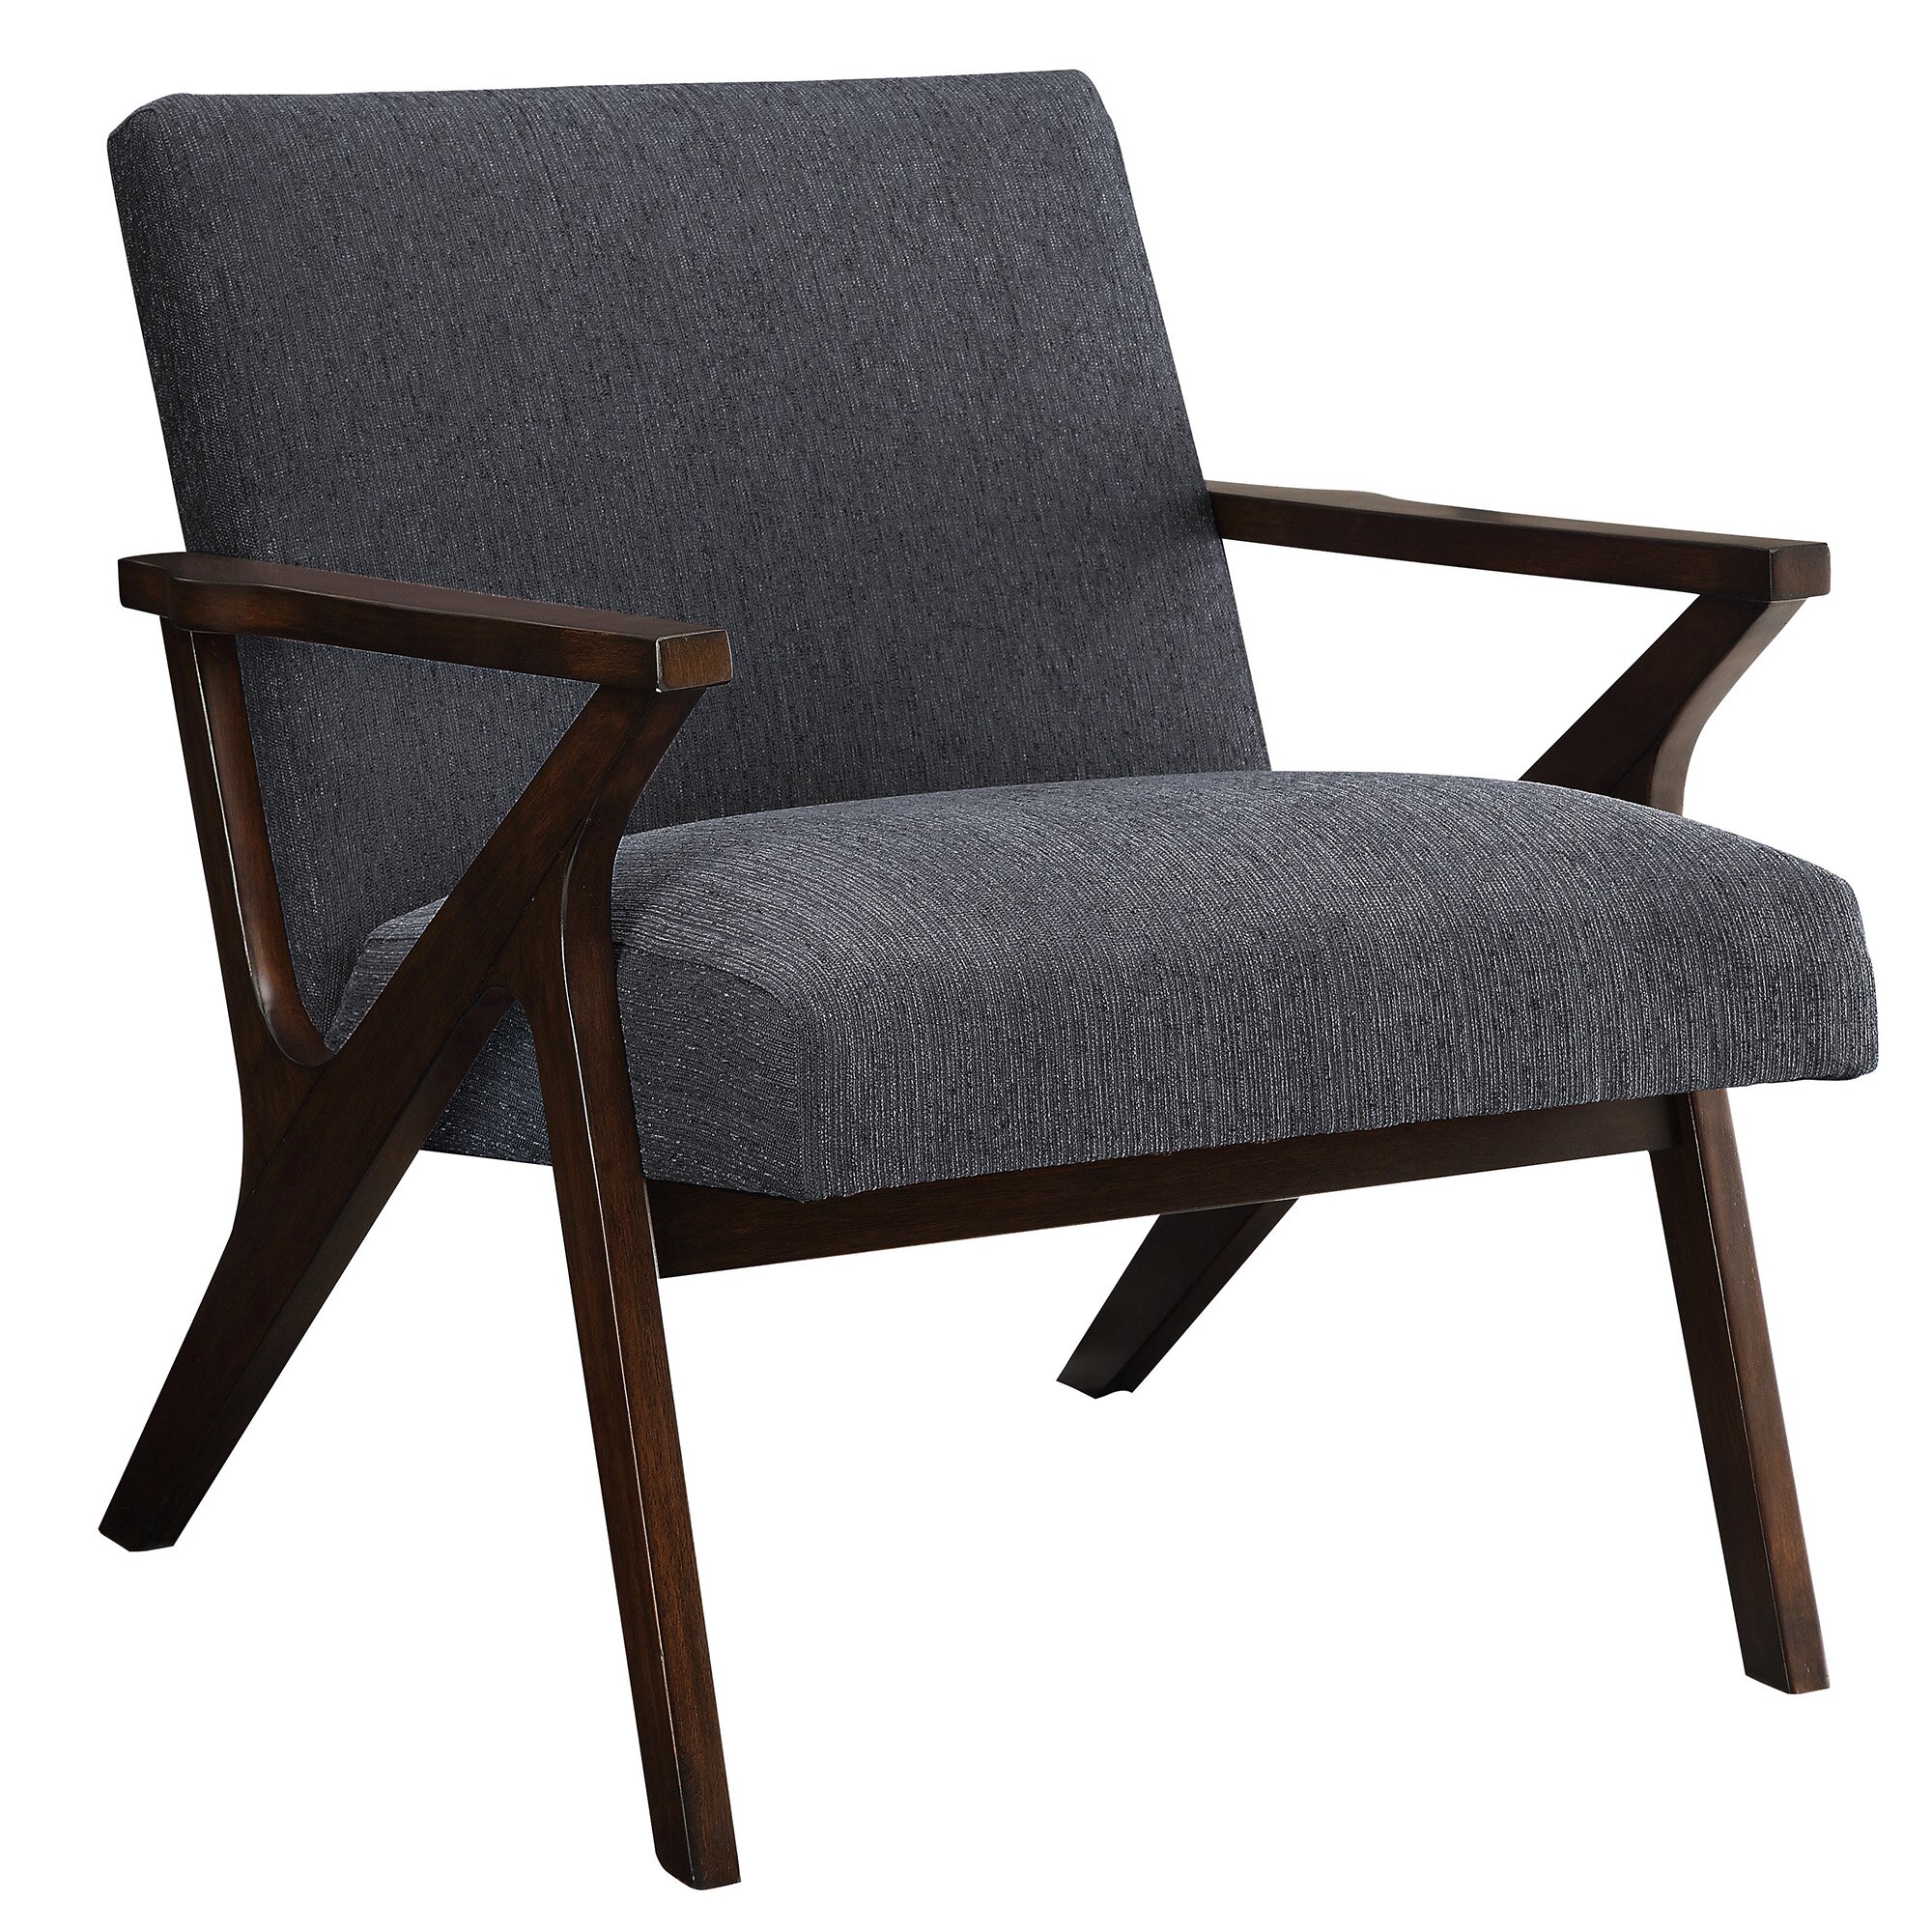 !nspire Upholstered Accent Arm Chair & Reviews | Wayfair